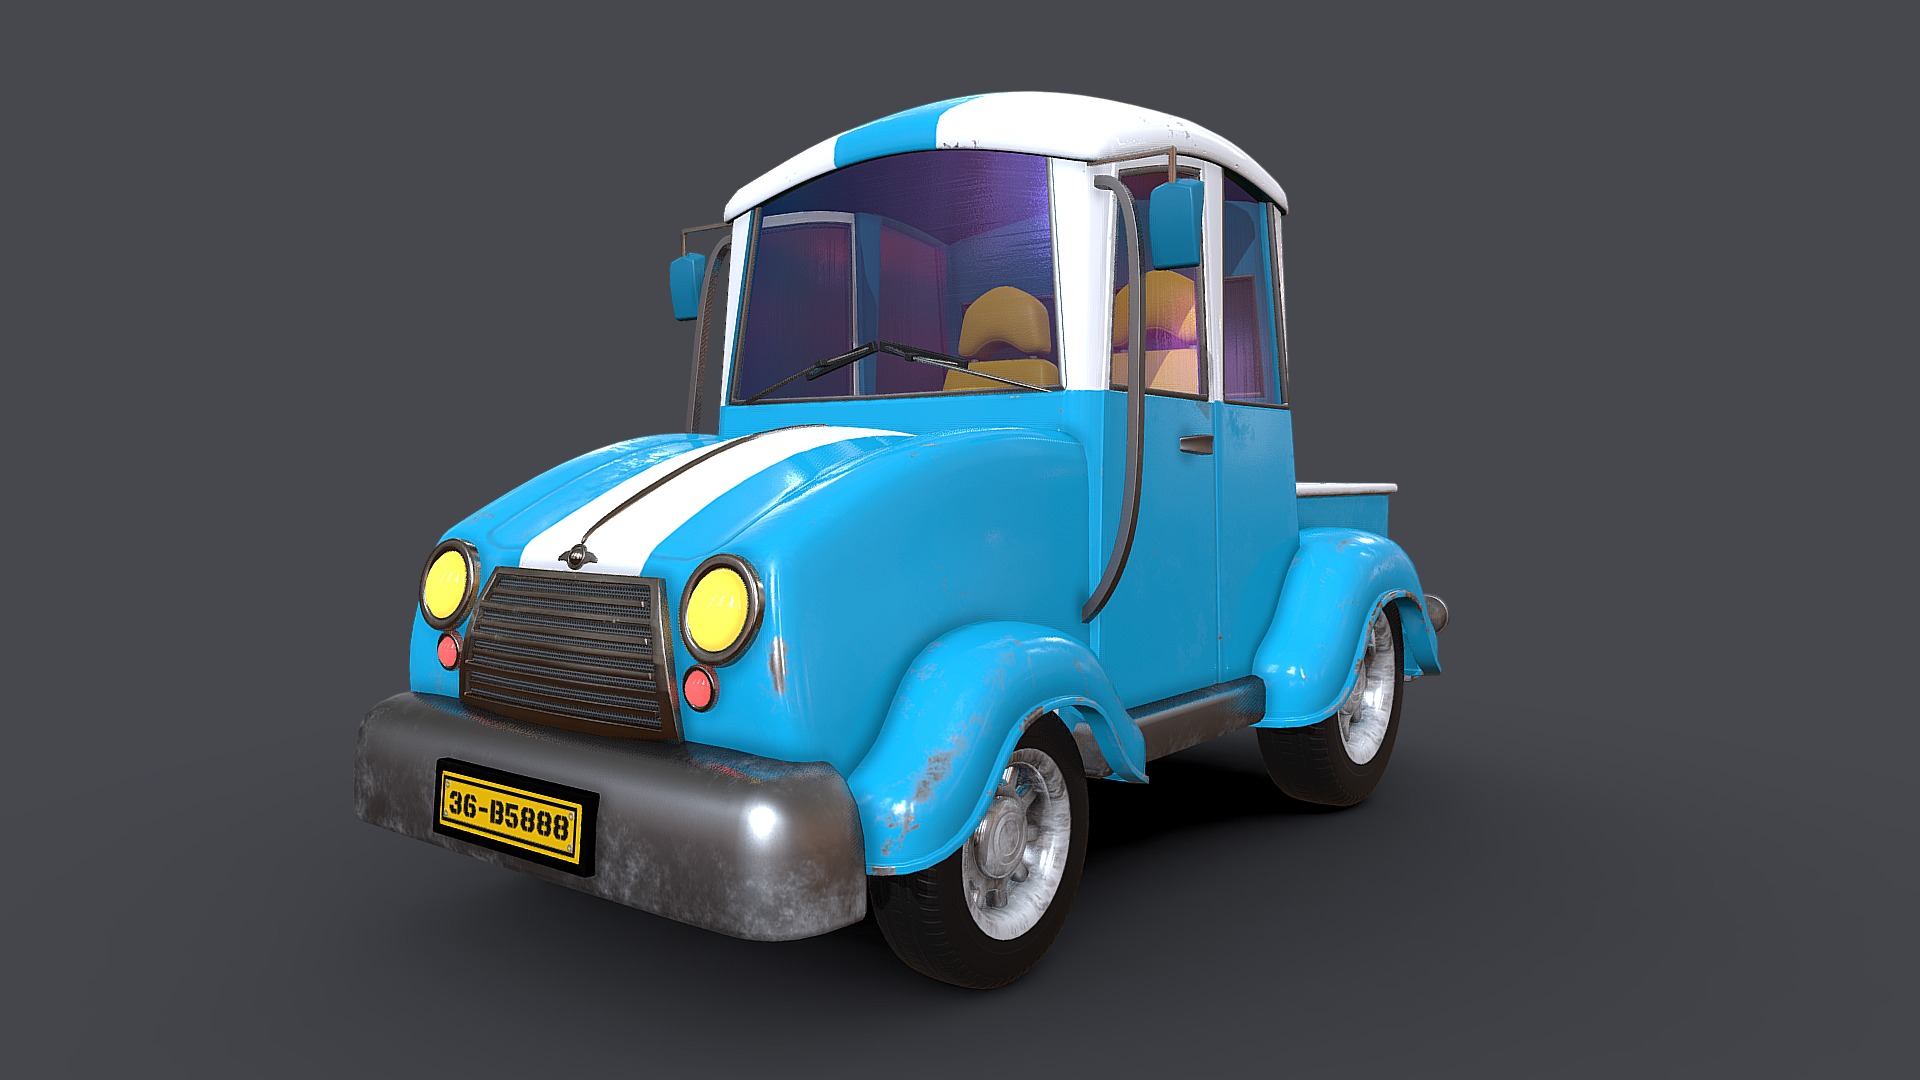 3D model Asset – Cartoons – Car – Truck VR / AR - This is a 3D model of the Asset - Cartoons - Car - Truck VR / AR. The 3D model is about a small blue car.